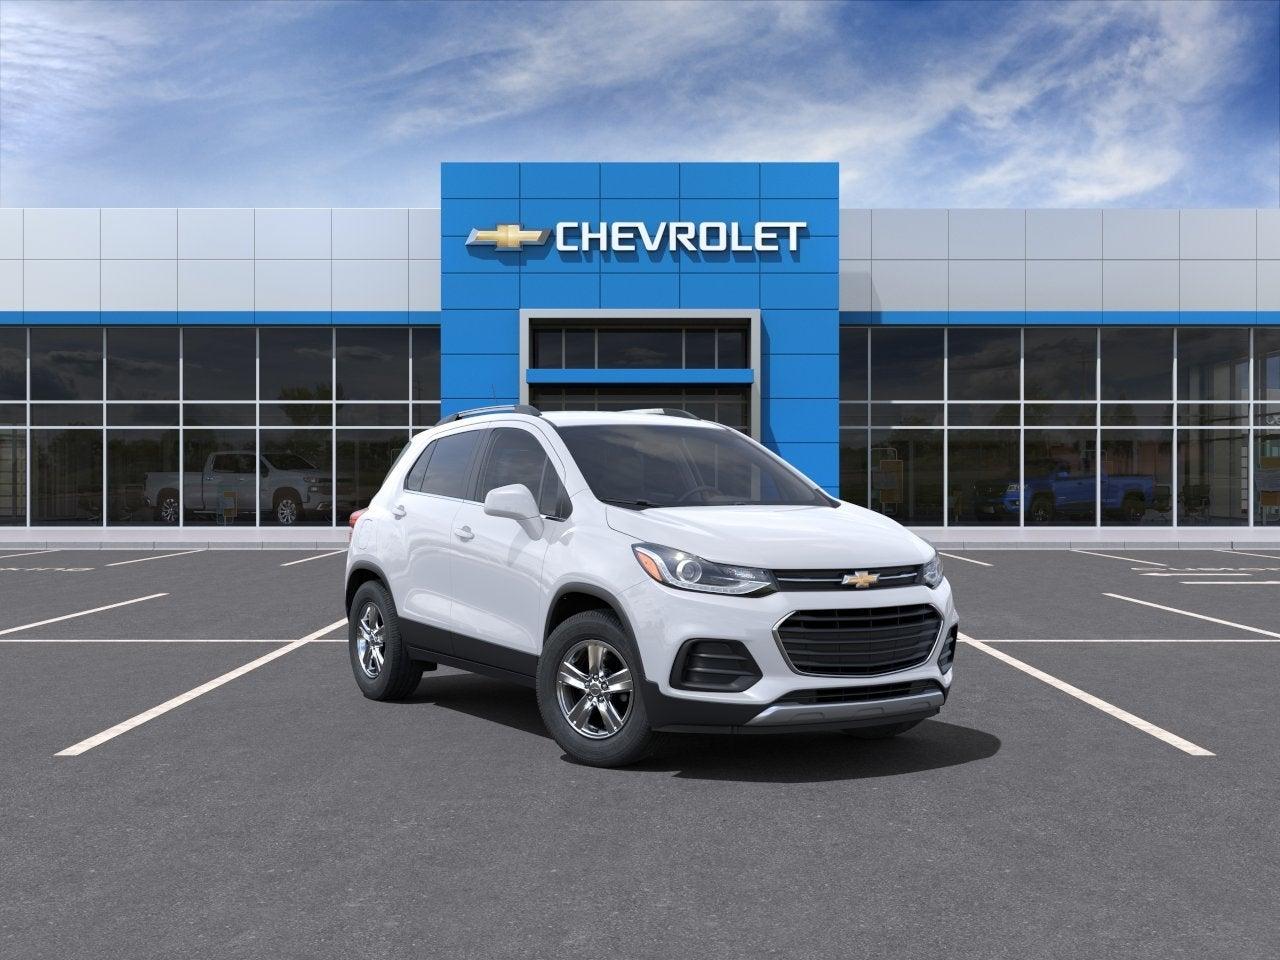 2022 Chevrolet Trax Photo in Wooster, OH 44691